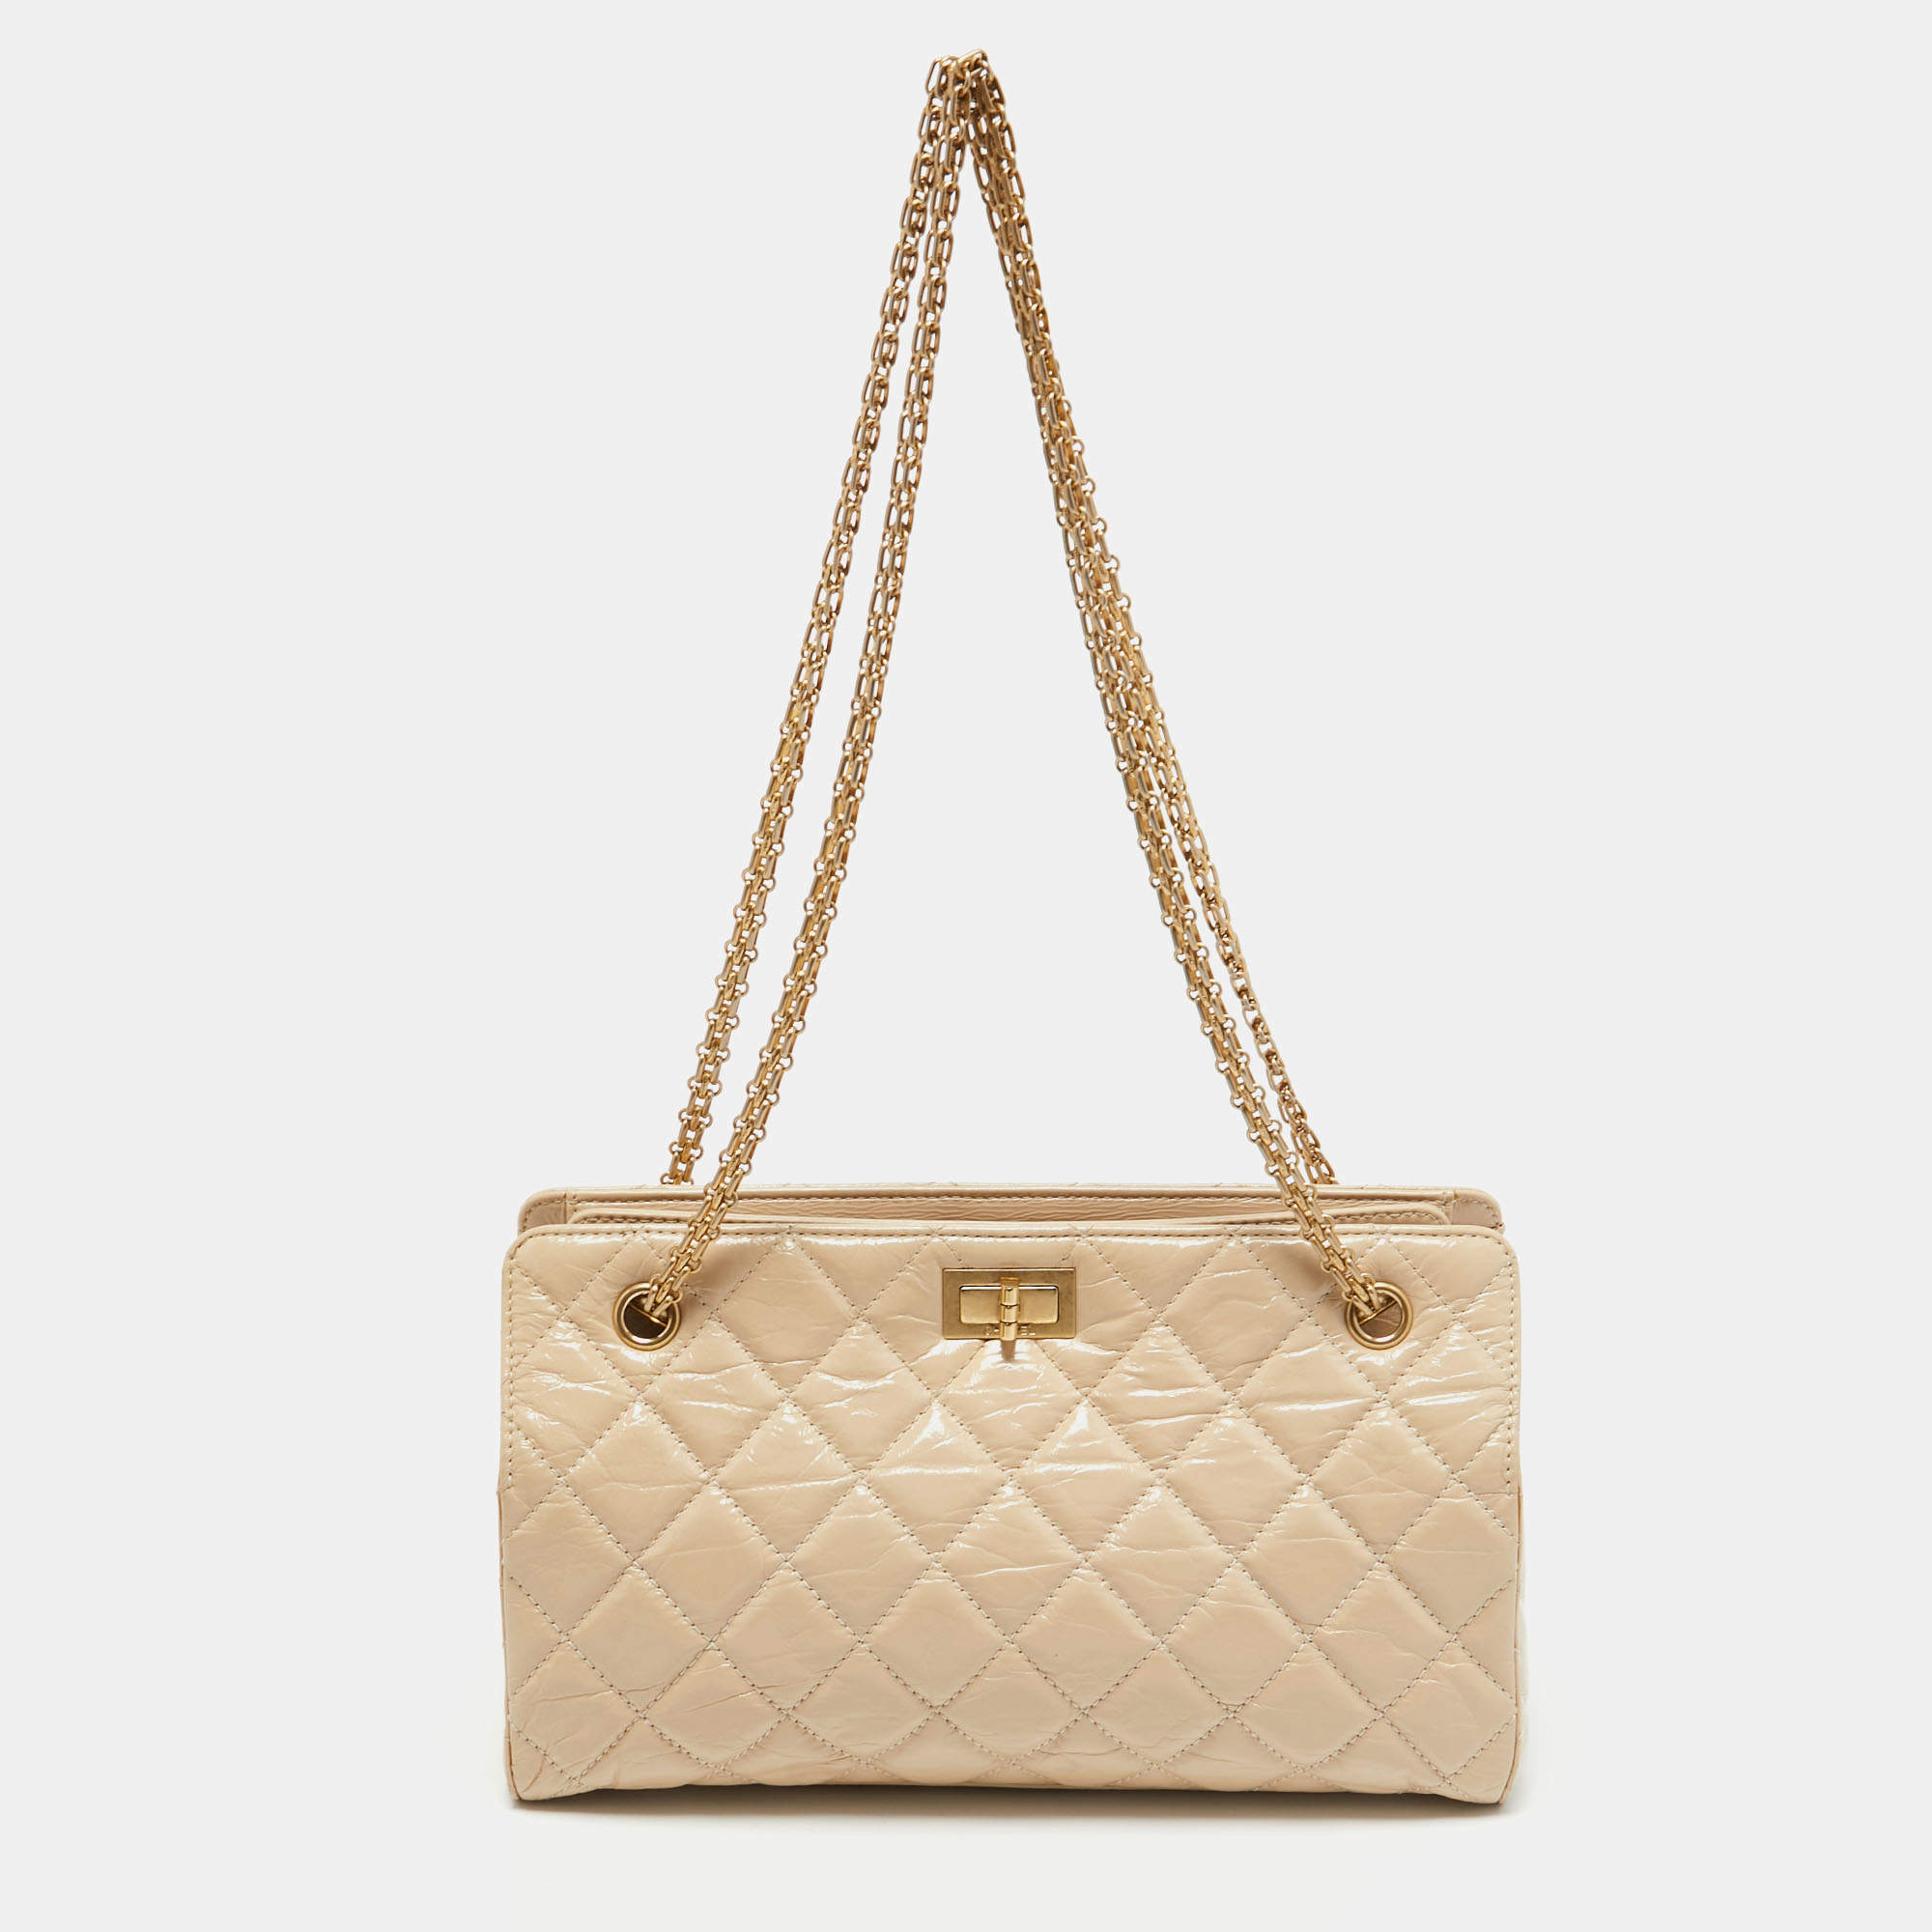 Chanel Light Beige Quilted Glazed Age Leather Reissue Chain Tote